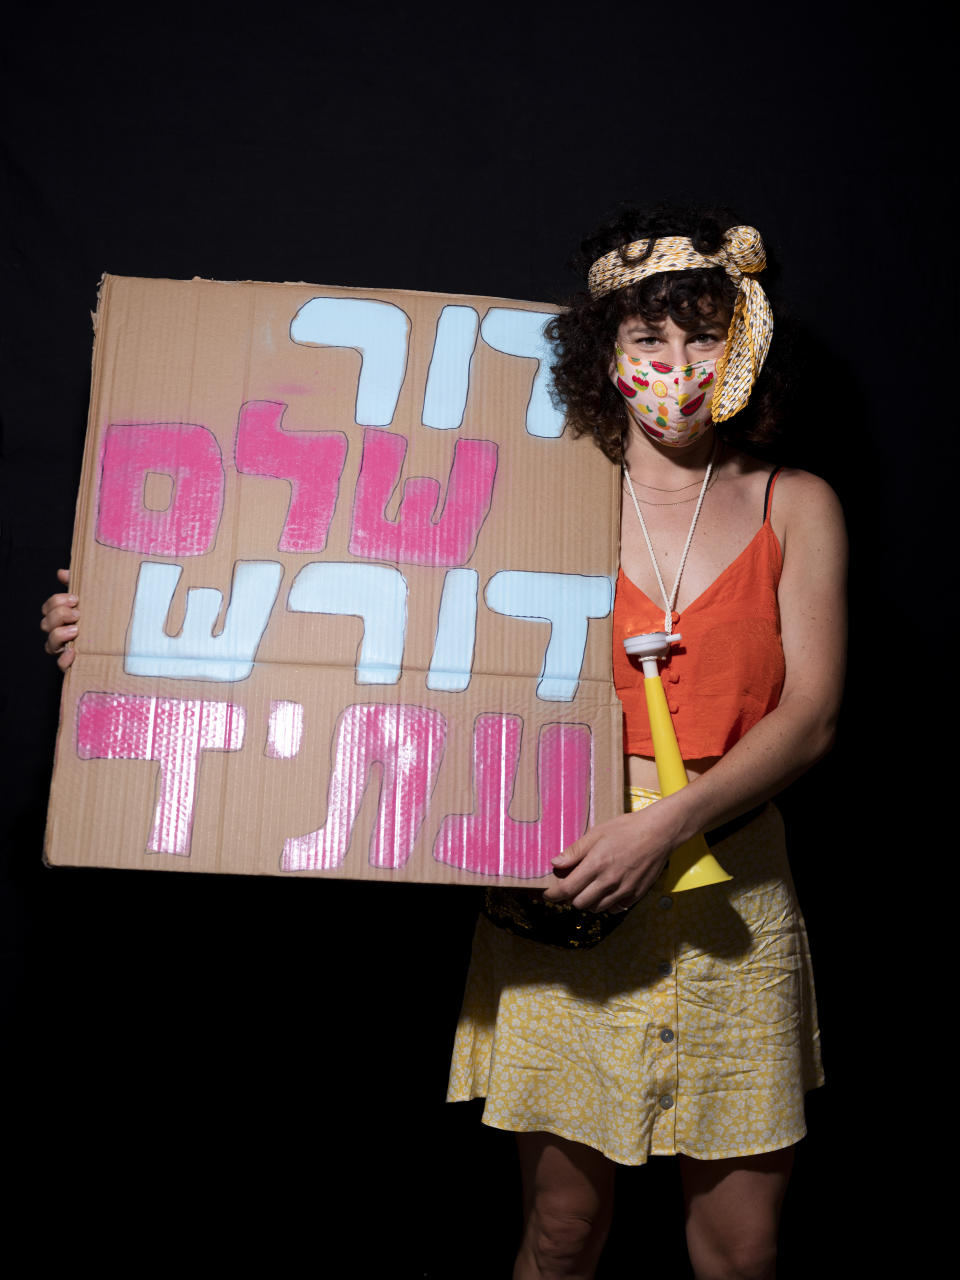 Kalanit Sharon, 31, poses for a photo during a protest against Israel's Prime Minister Benjamin Netanyahu, outside his residence in Jerusalem, Thursday, July 23, 2020. Hebrew on sign reads "An entire generation demands for future". The wave of colorful and combative demonstrations against Netanyahu and his perceived failure to handle the country's deepening economic crisis have been characterized by youth. With flags, facemasks, drums, placards and an assortment of props, thousands have been taking to the streets to demand change in a variety of unique ways. (AP Photo/Oded Balilty)